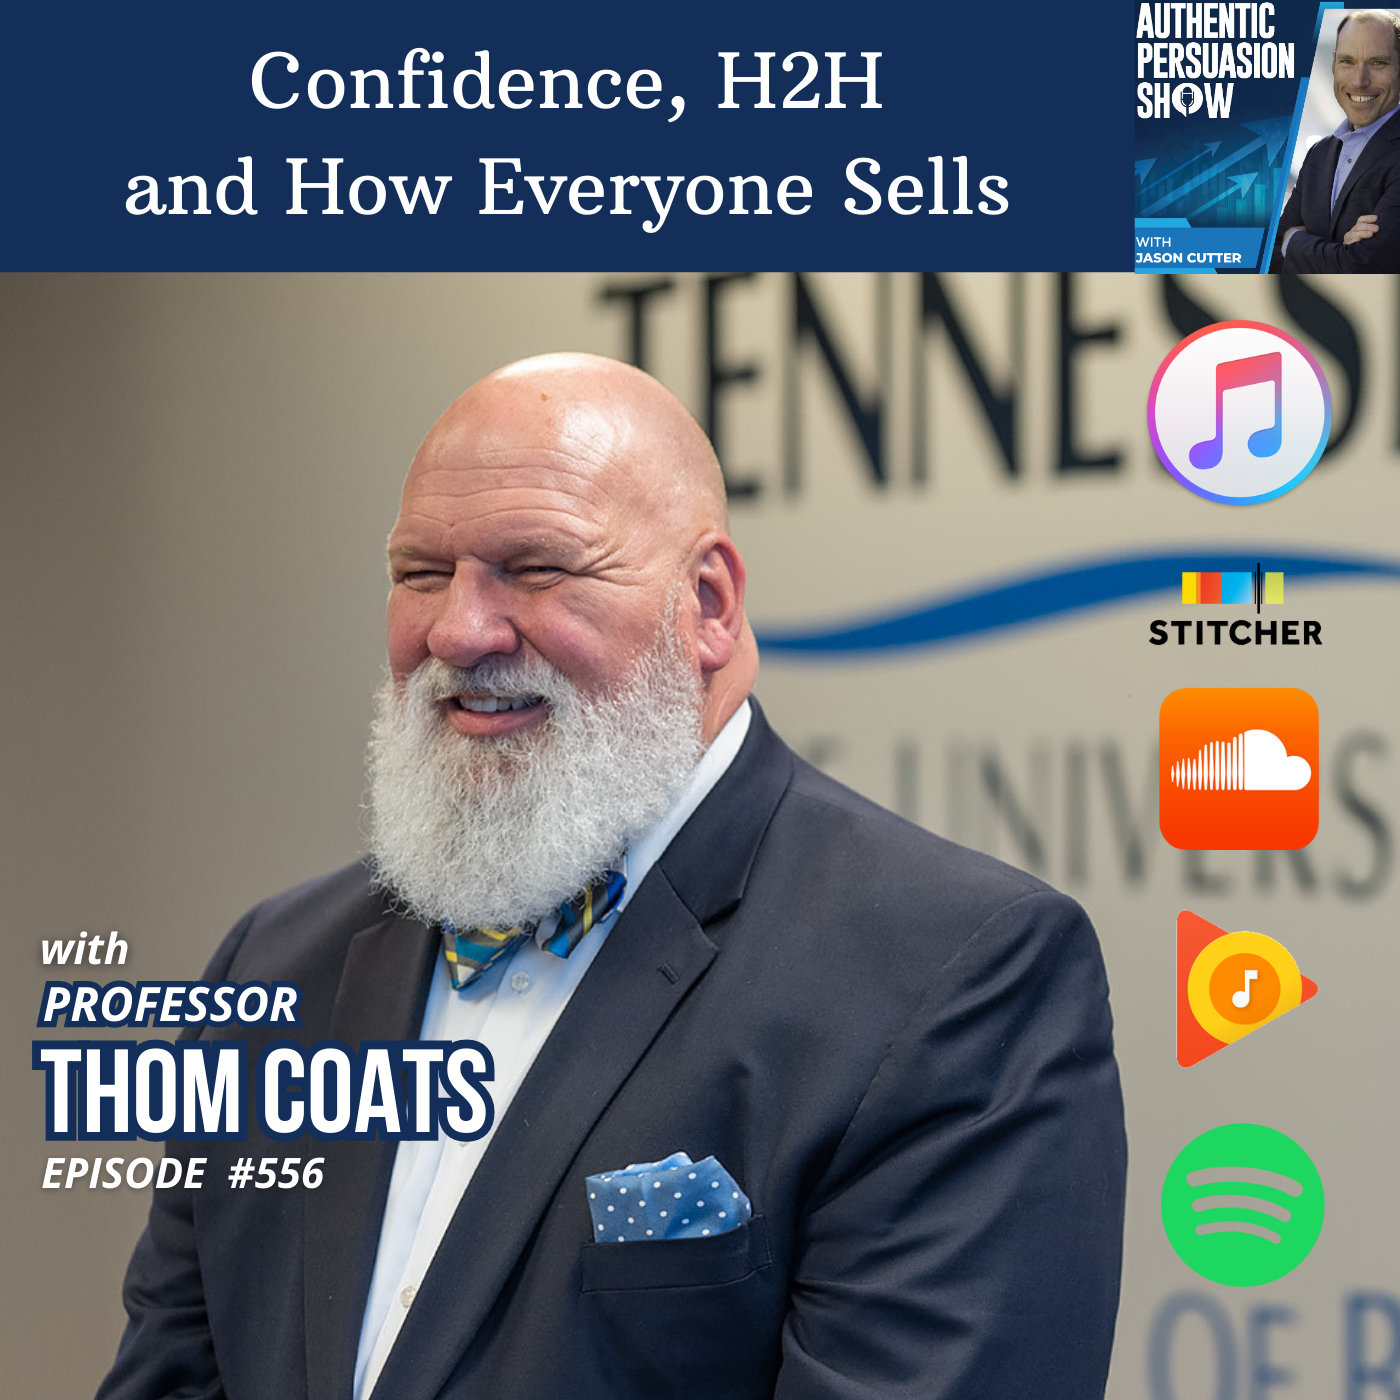 [556] Confidence, H2H and How Everyone Sells, with Professor Thom Coats from MTSU